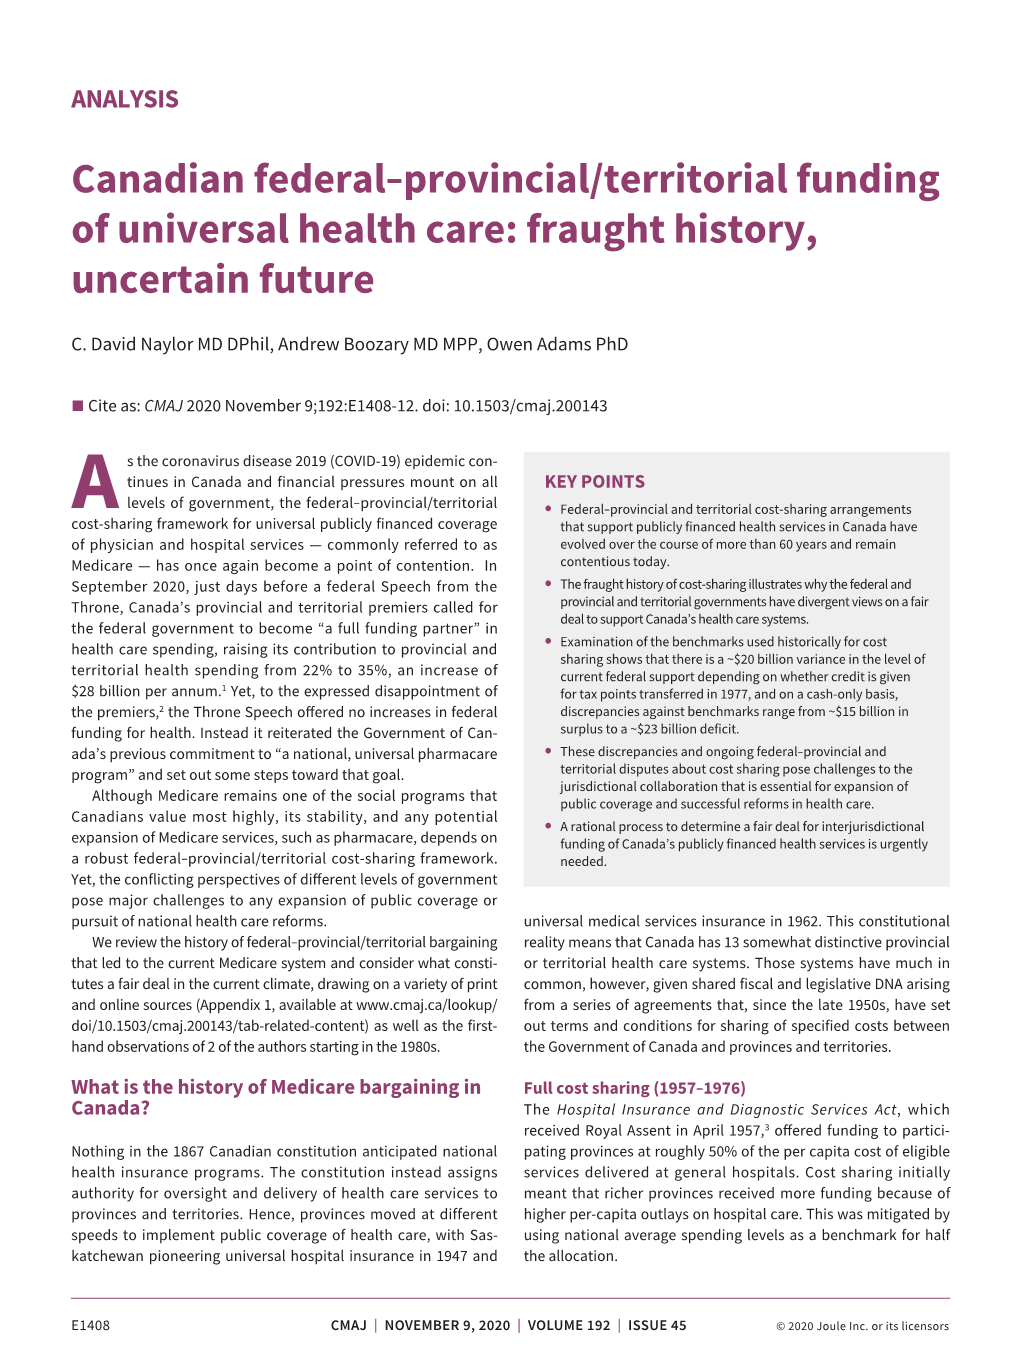 Canadian Federal–Provincial/Territorial Funding of Universal Health Care: Fraught History, Uncertain Future